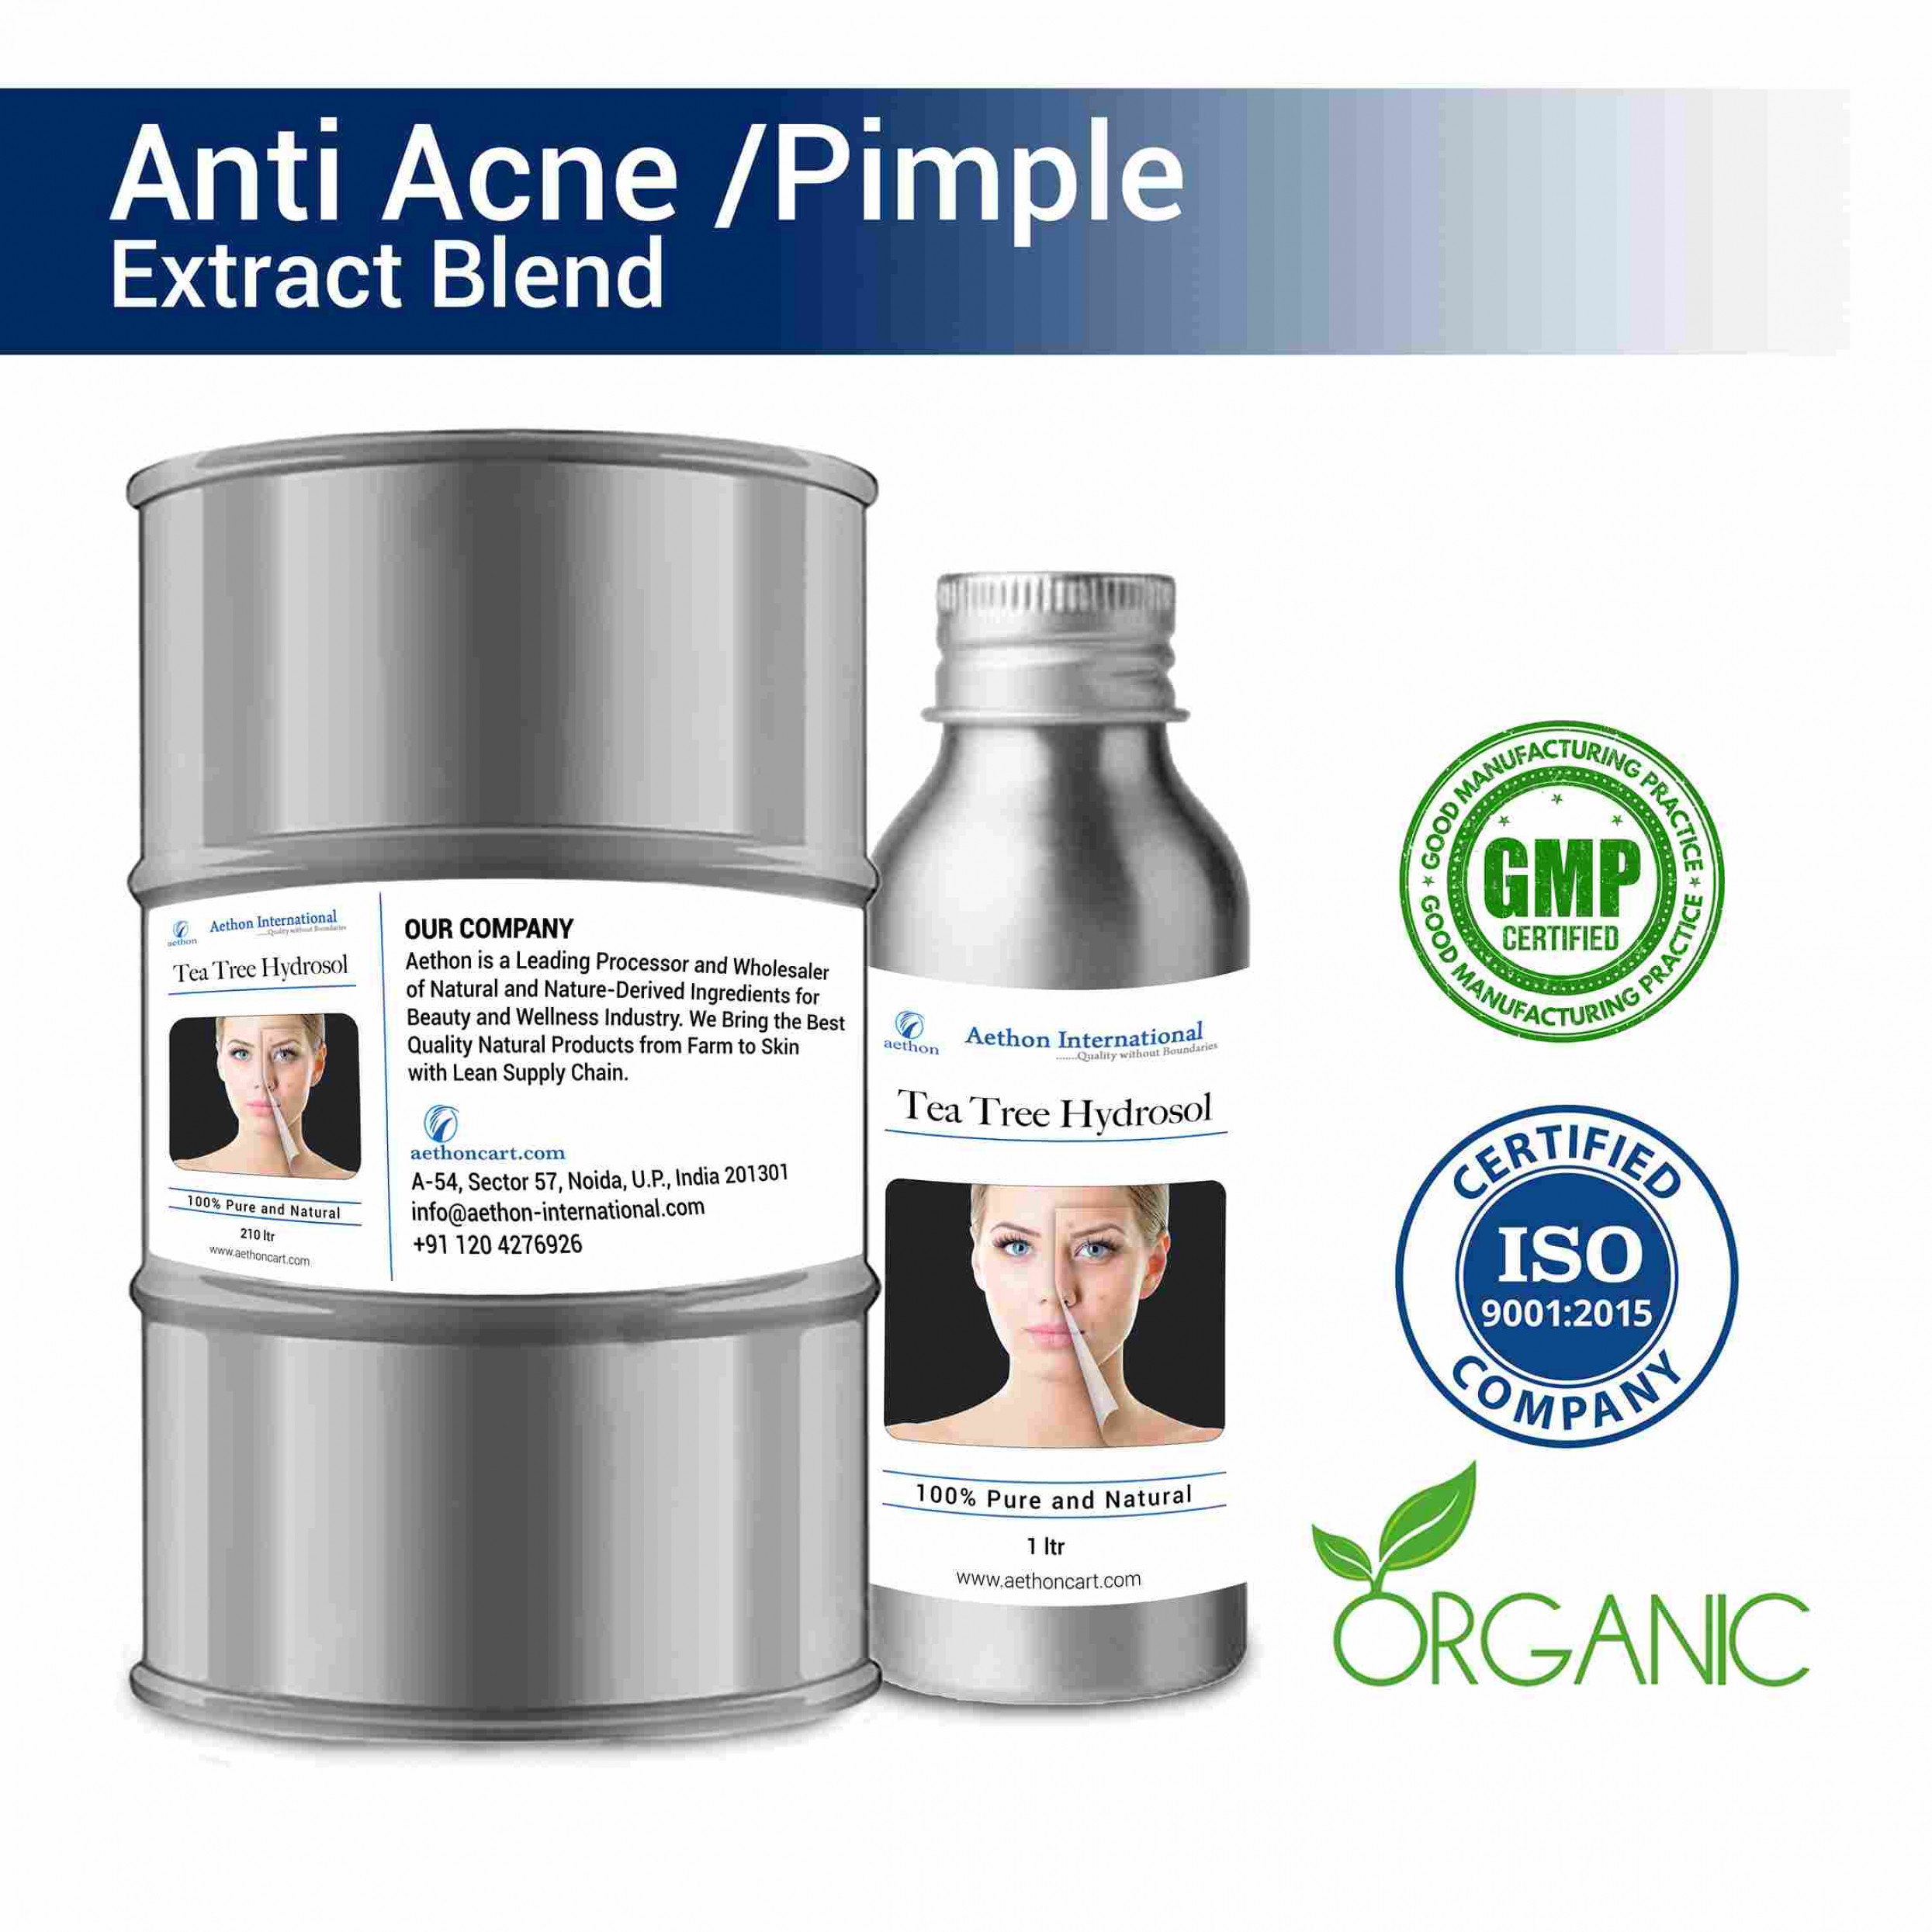 Anti Acne & Pimple Extract Blend (Oil)